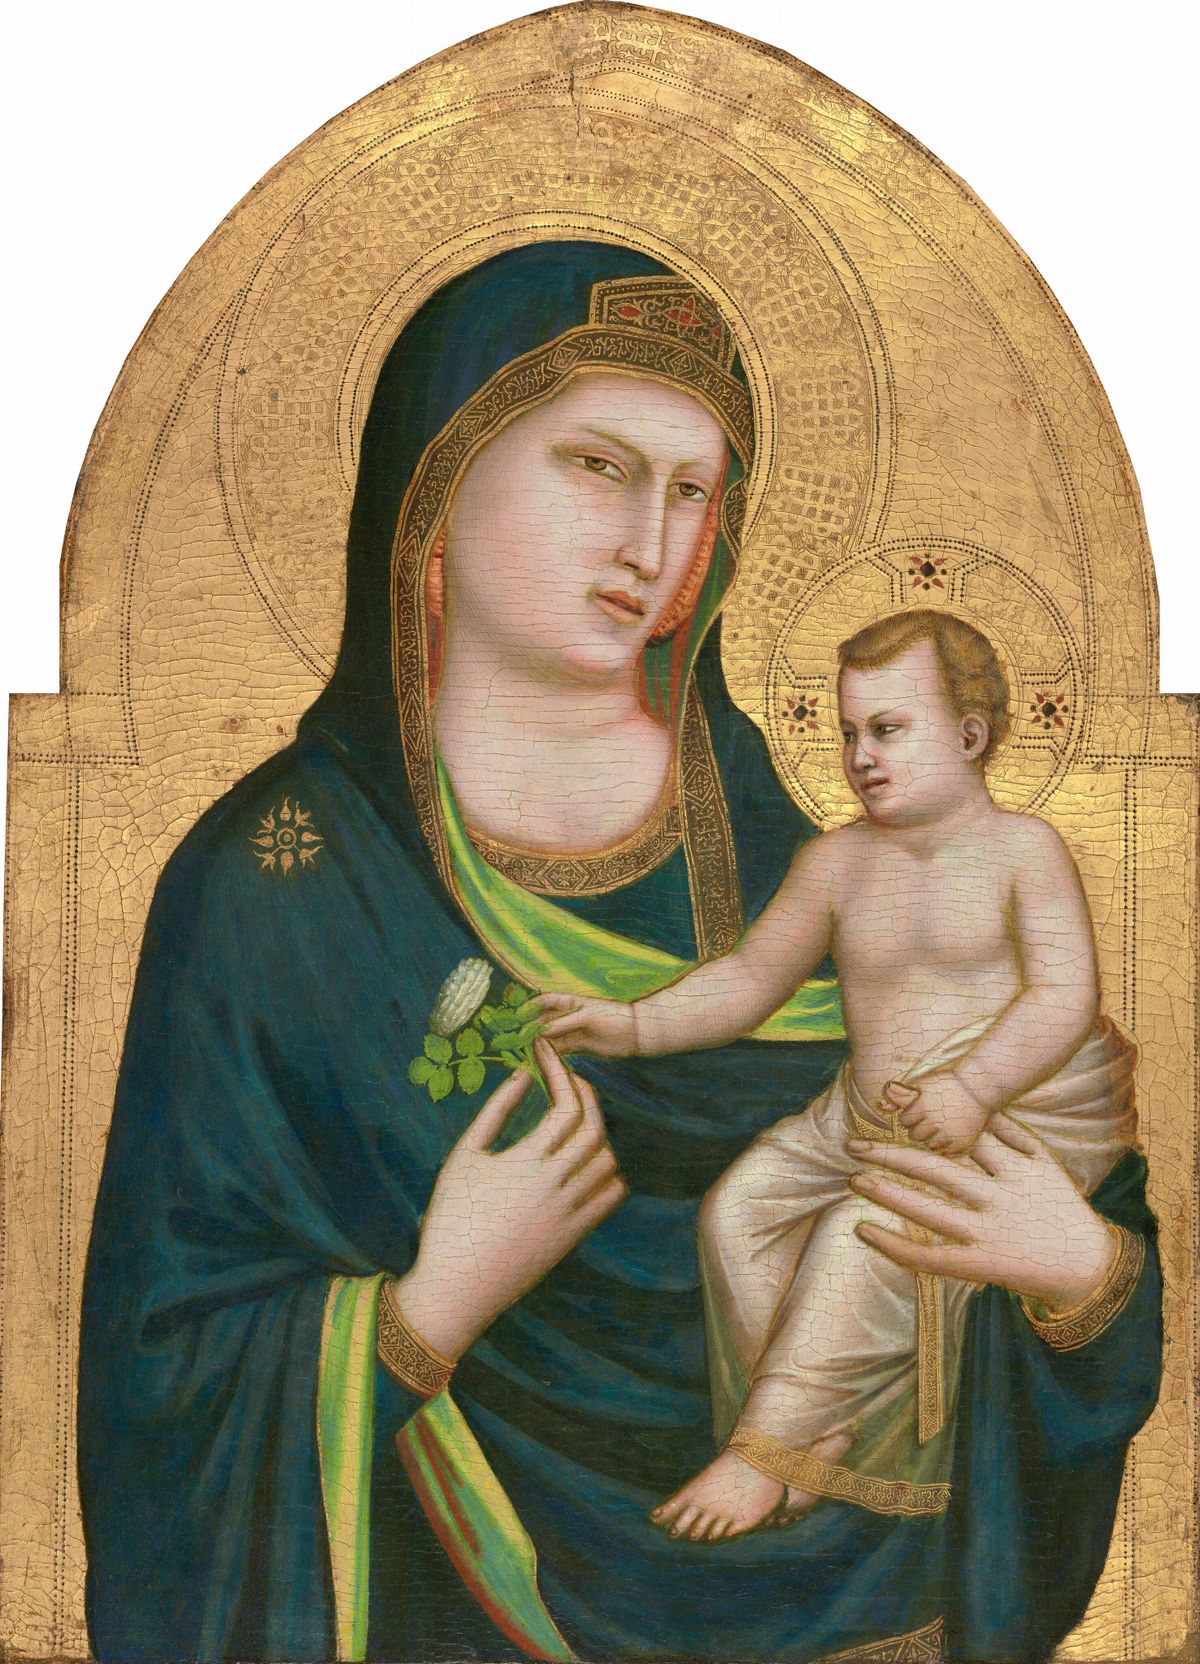 Madonna and Child by Giotto (1310-1315) - Public Domain Catholic Painting